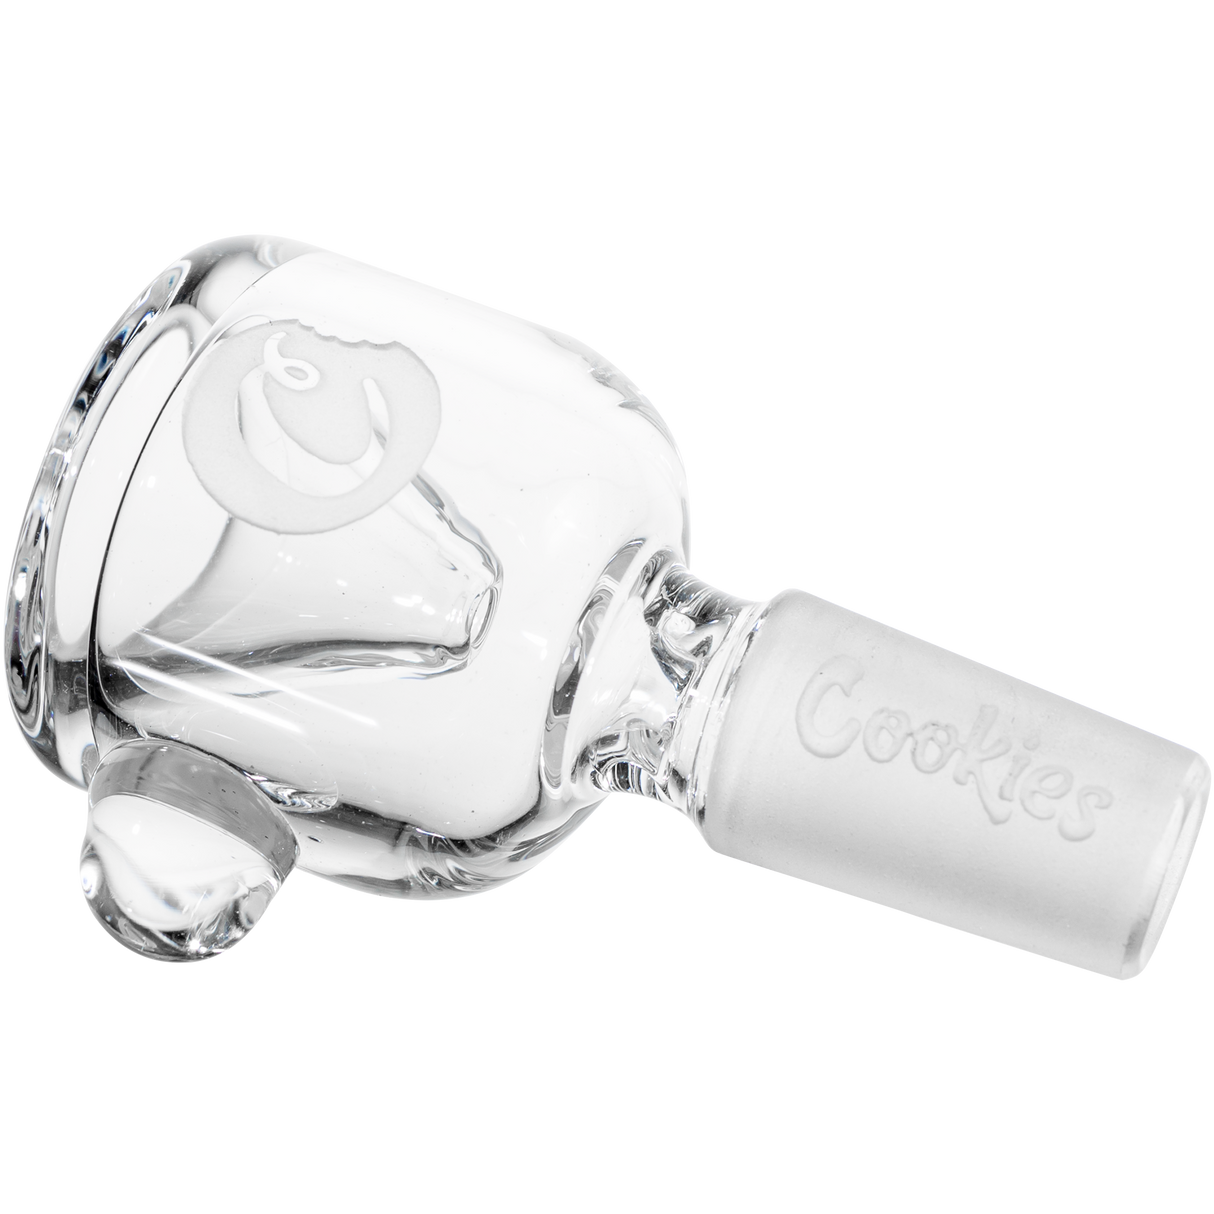 Cookies Classic Bong Bowl in Clear Borosilicate Glass, 14mm Joint - Angled Side View